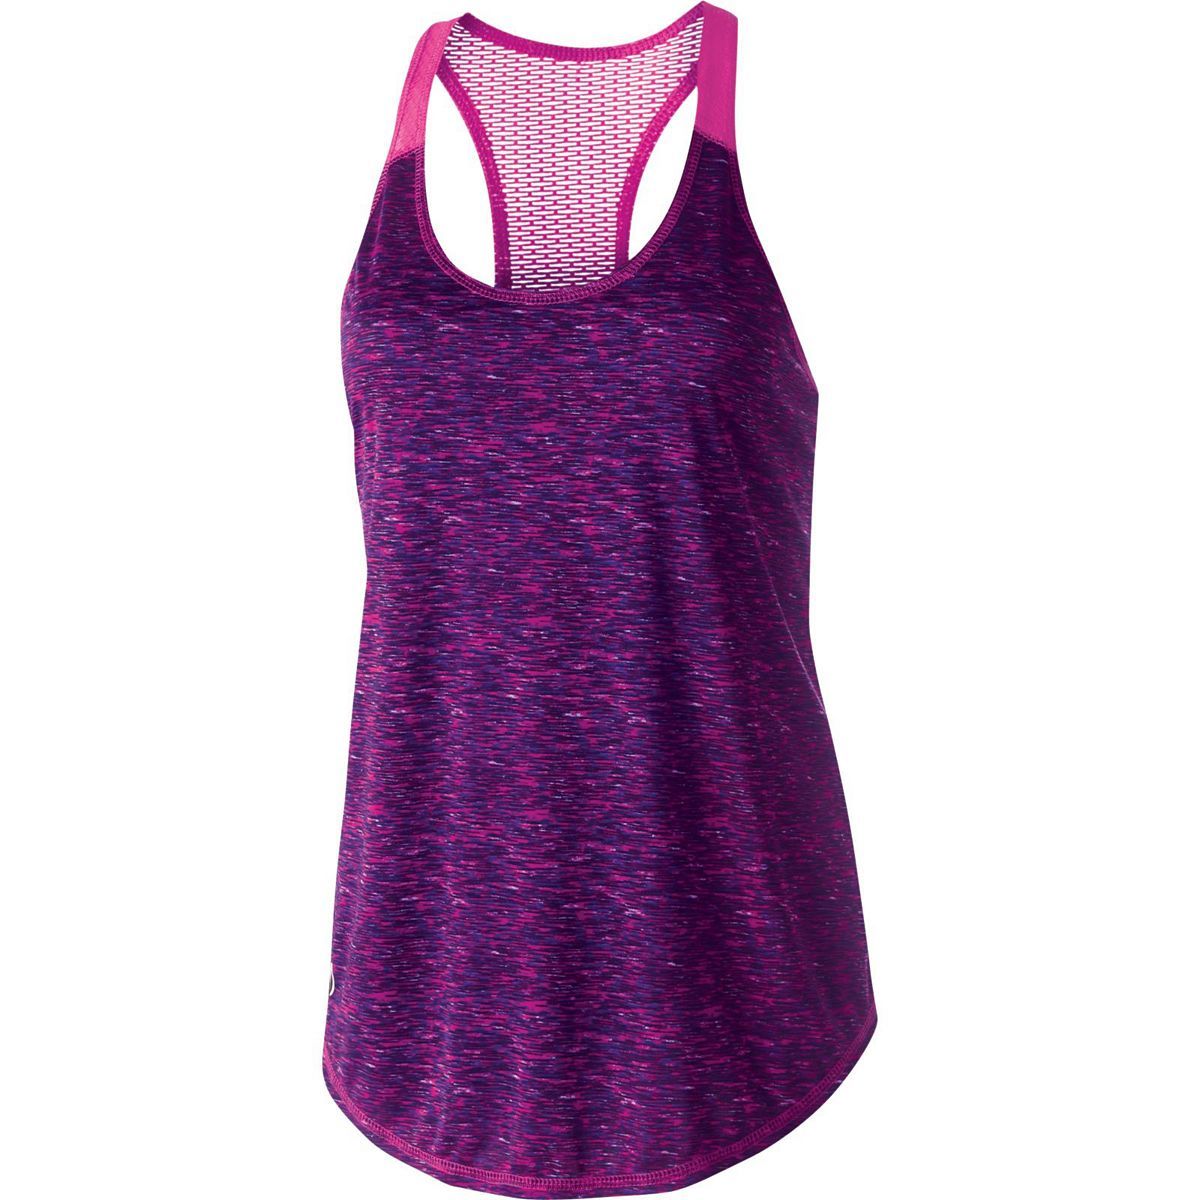 Holloway Girls Space Dye Tank in Power Purple/Power Pink  -Part of the Girls, Holloway, Girls-Tank, Shirts product lines at KanaleyCreations.com